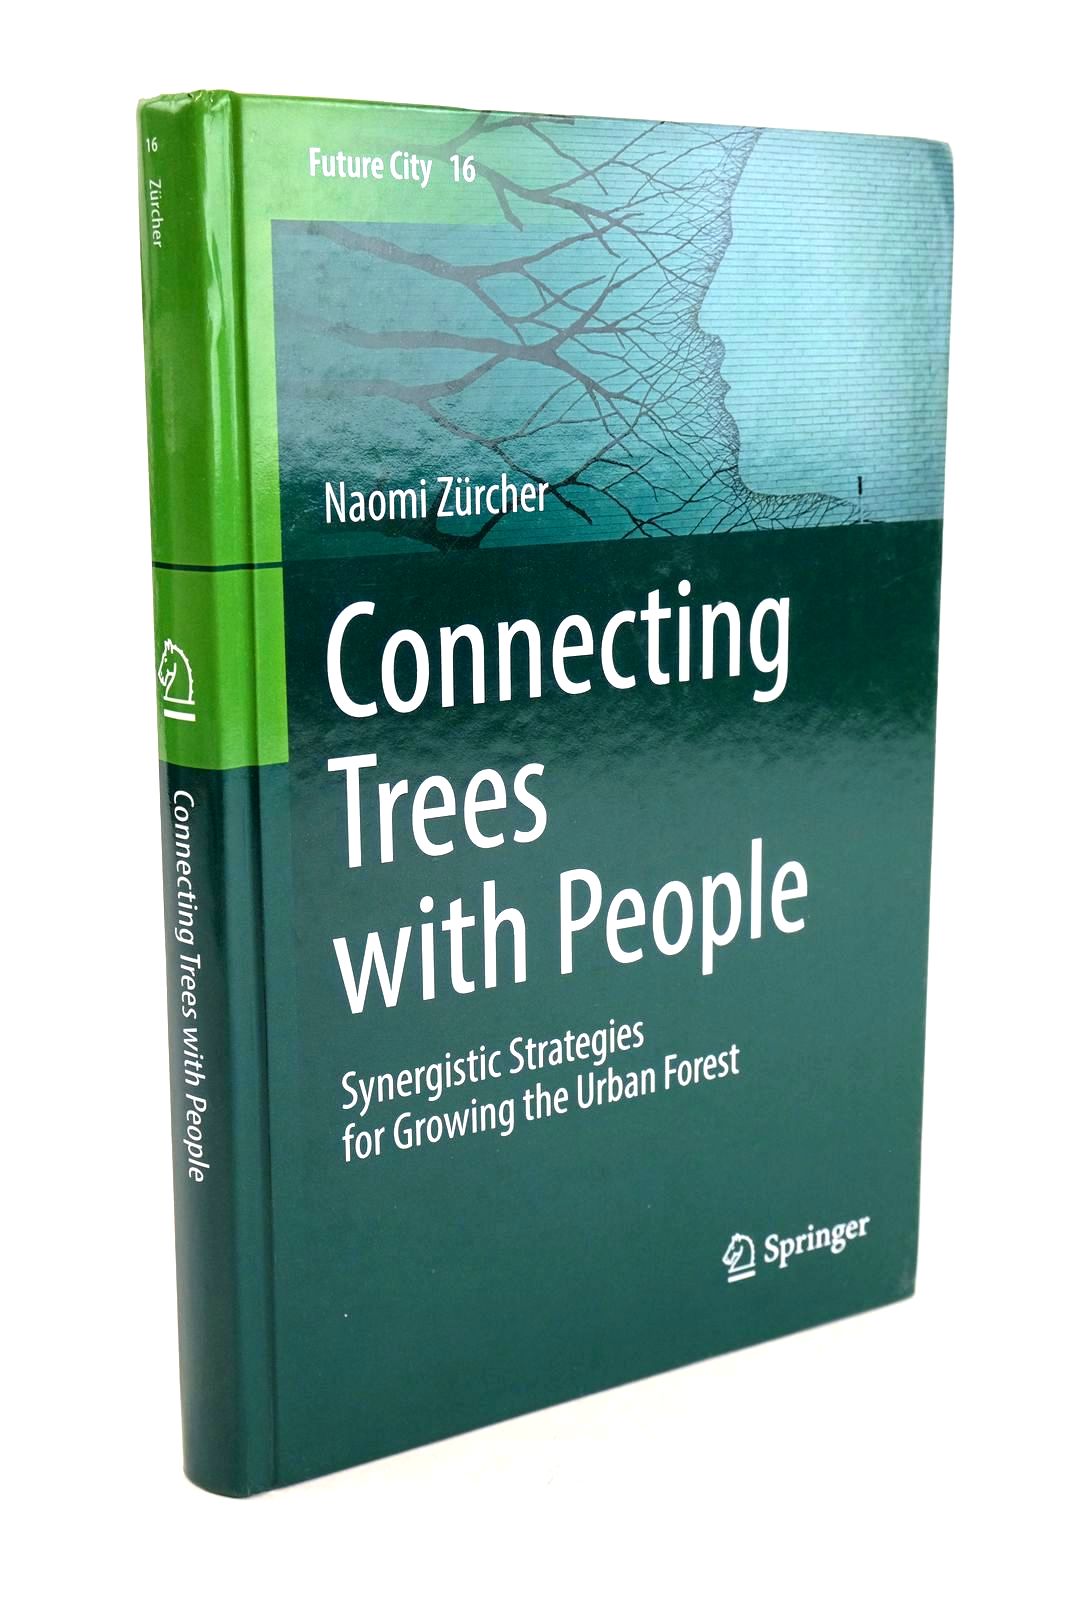 Photo of CONNECTING TREES WITH PEOPLE- Stock Number: 1324171